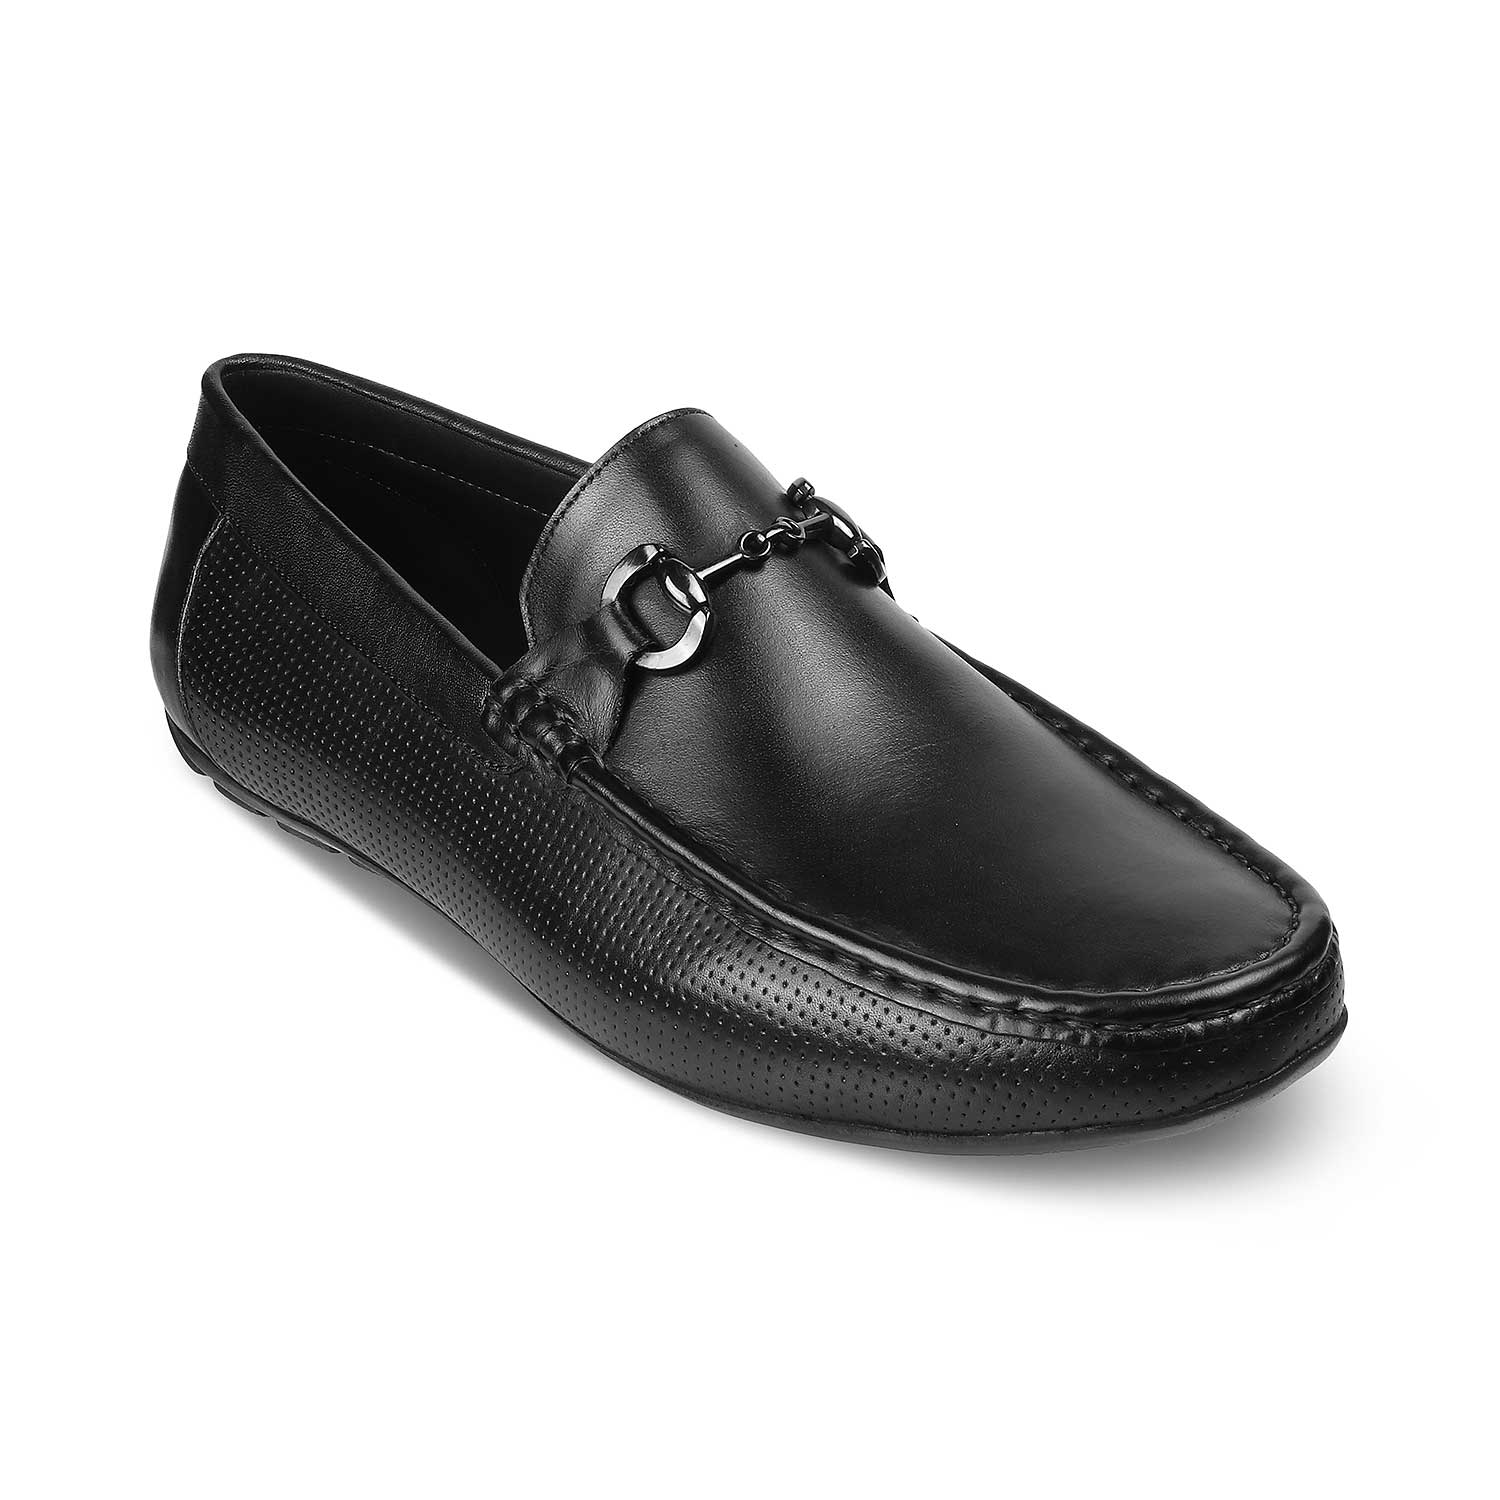 The Otterdam Black Men's Leather Driving Loafers - Tresmode